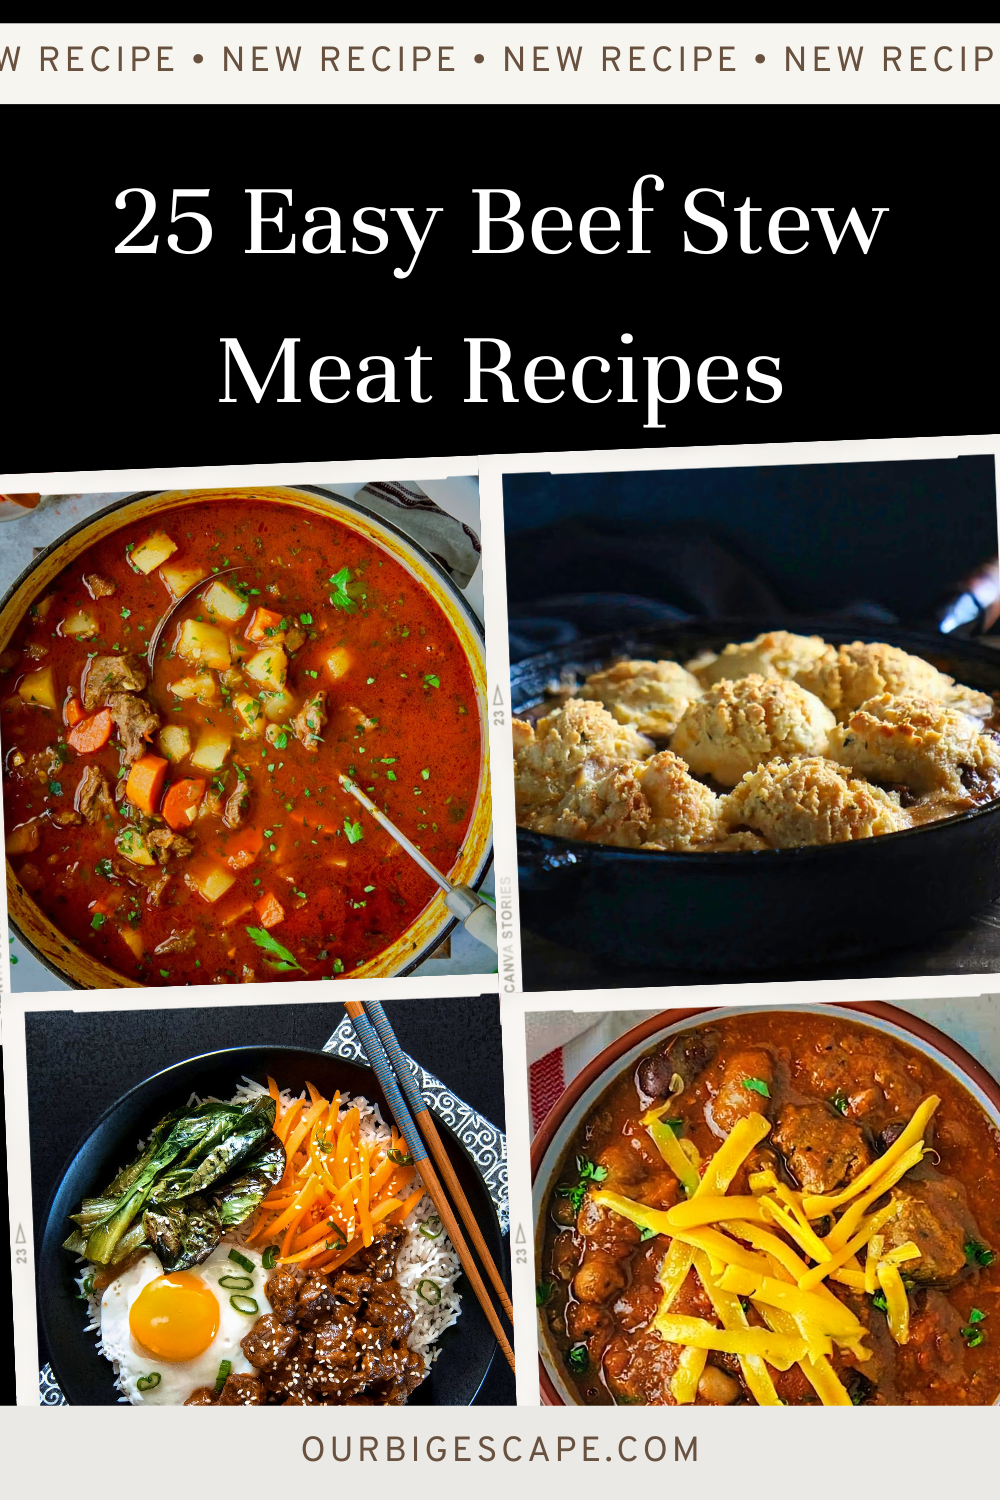 25 Simple And Easy Beef Stew Meat Recipes